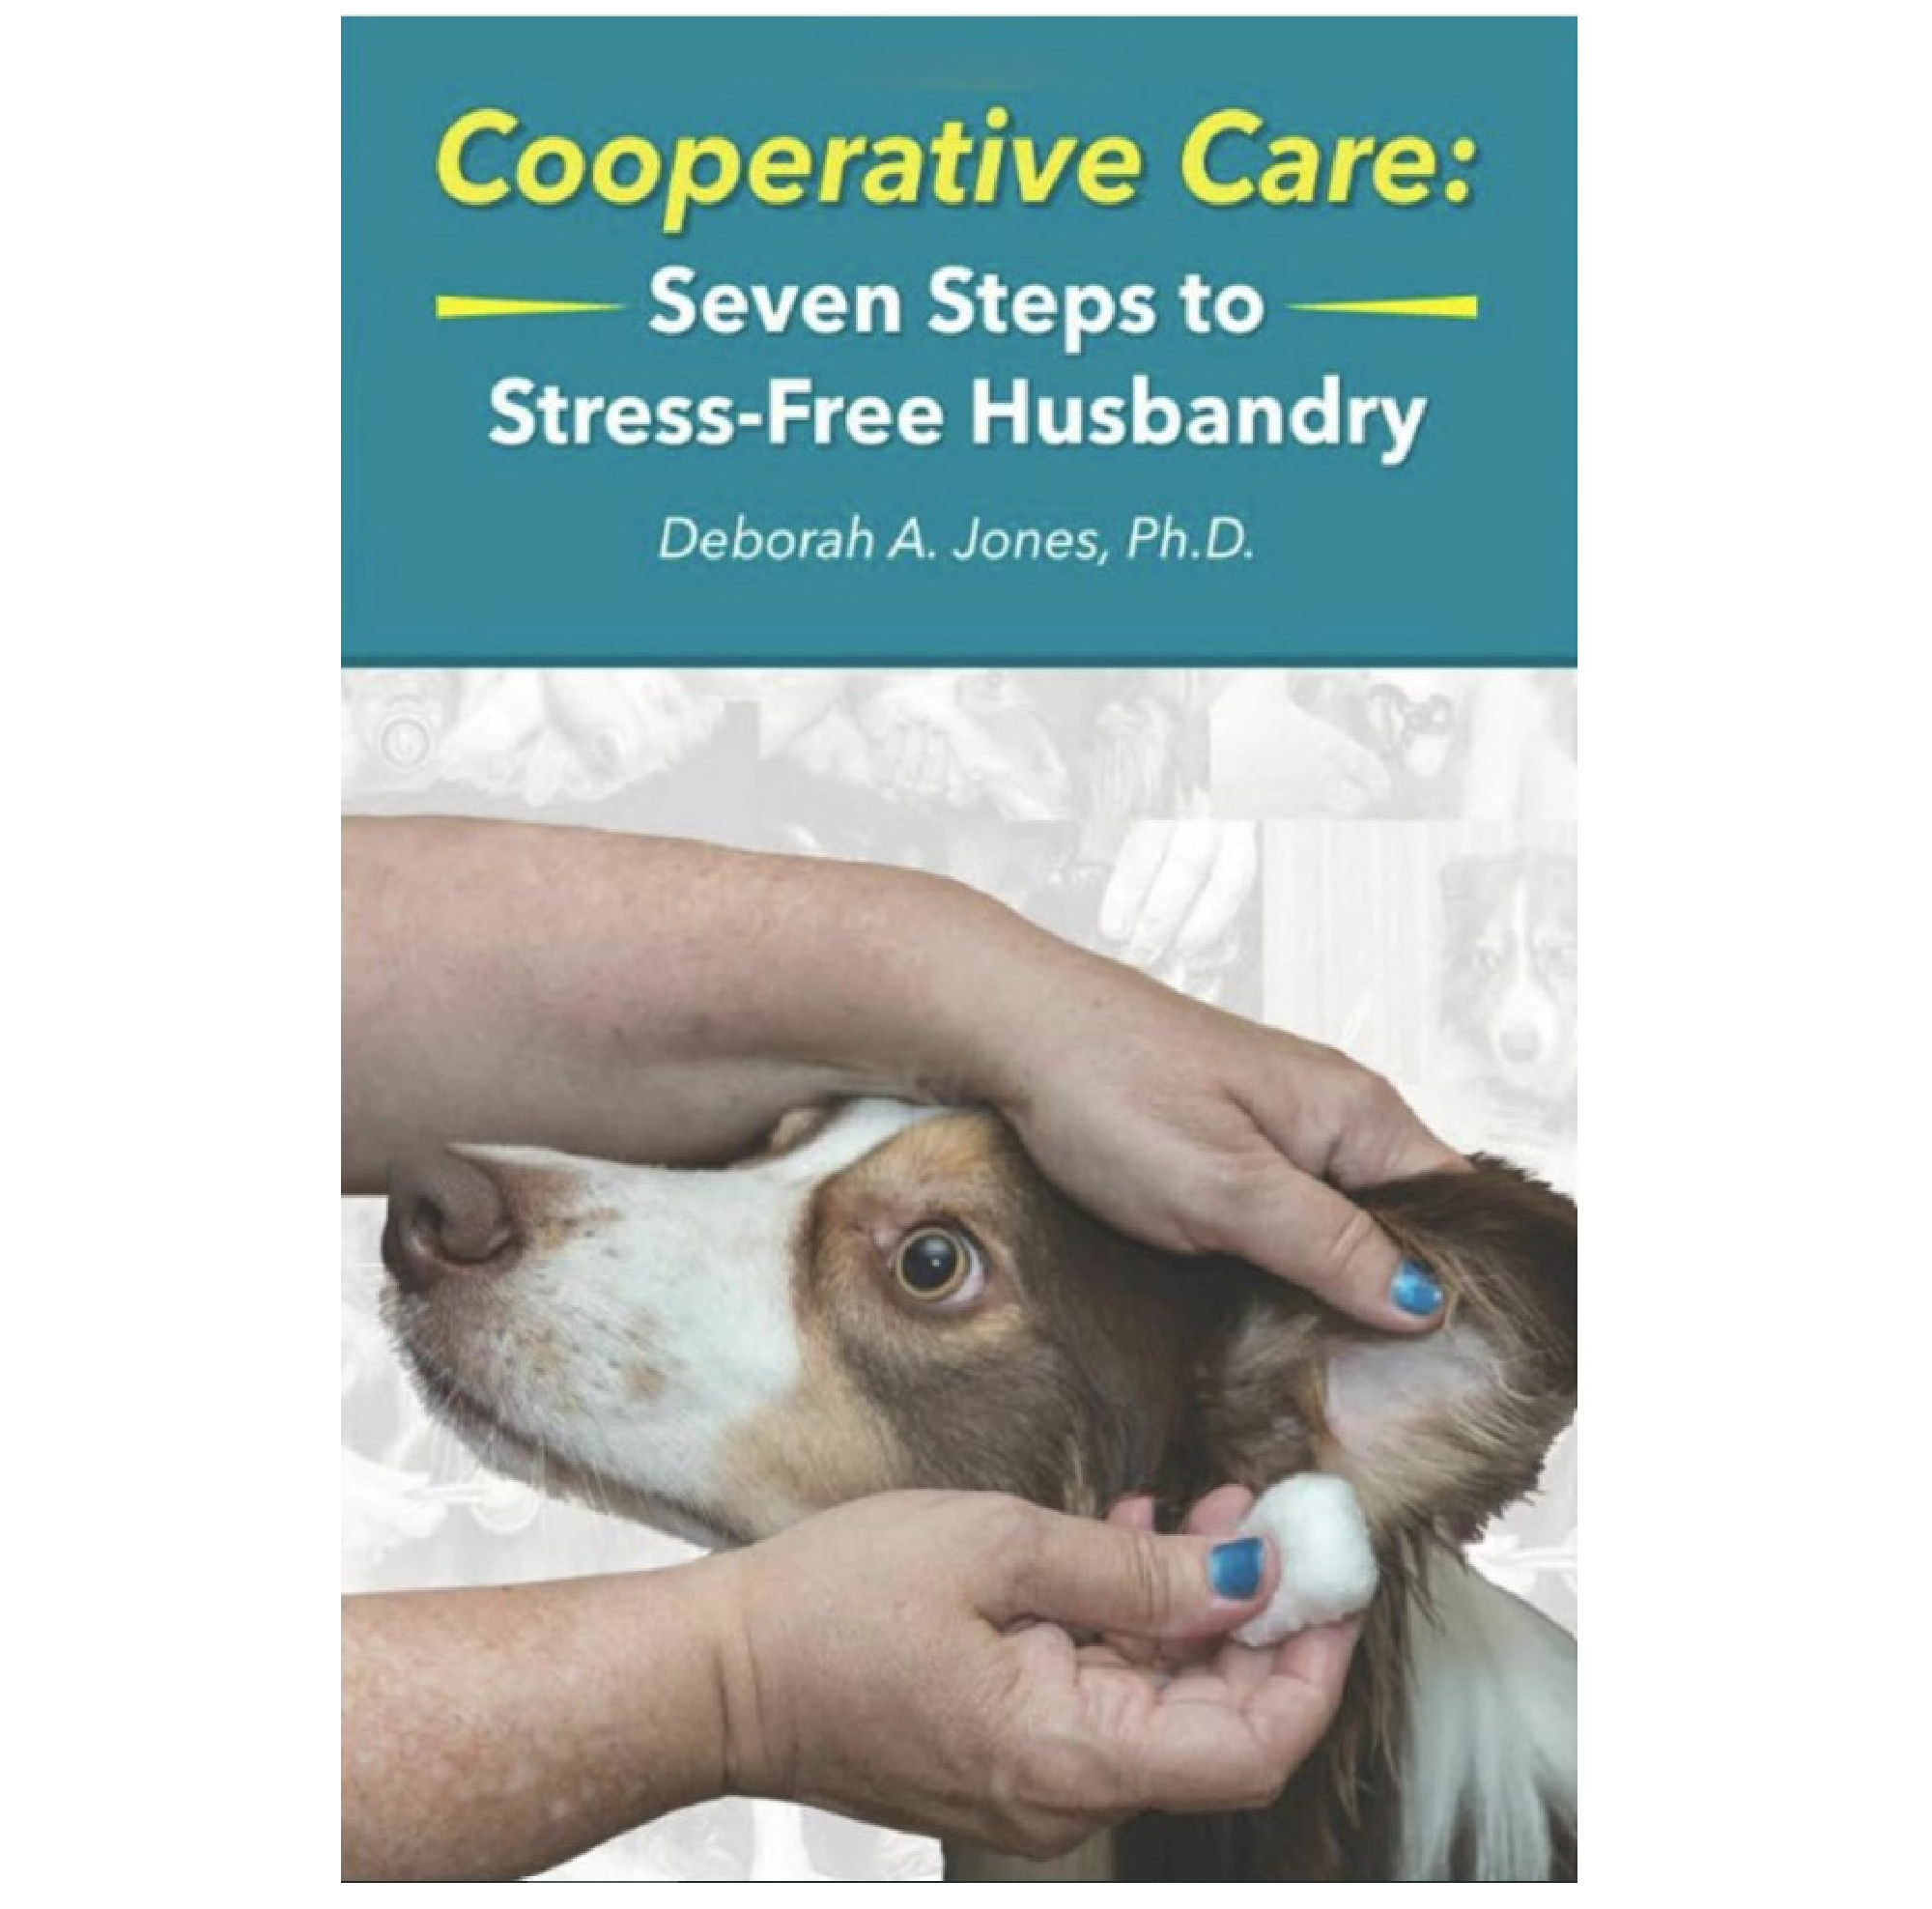 Cooperative Care: Seven Steps to Stress-Free Husbandry